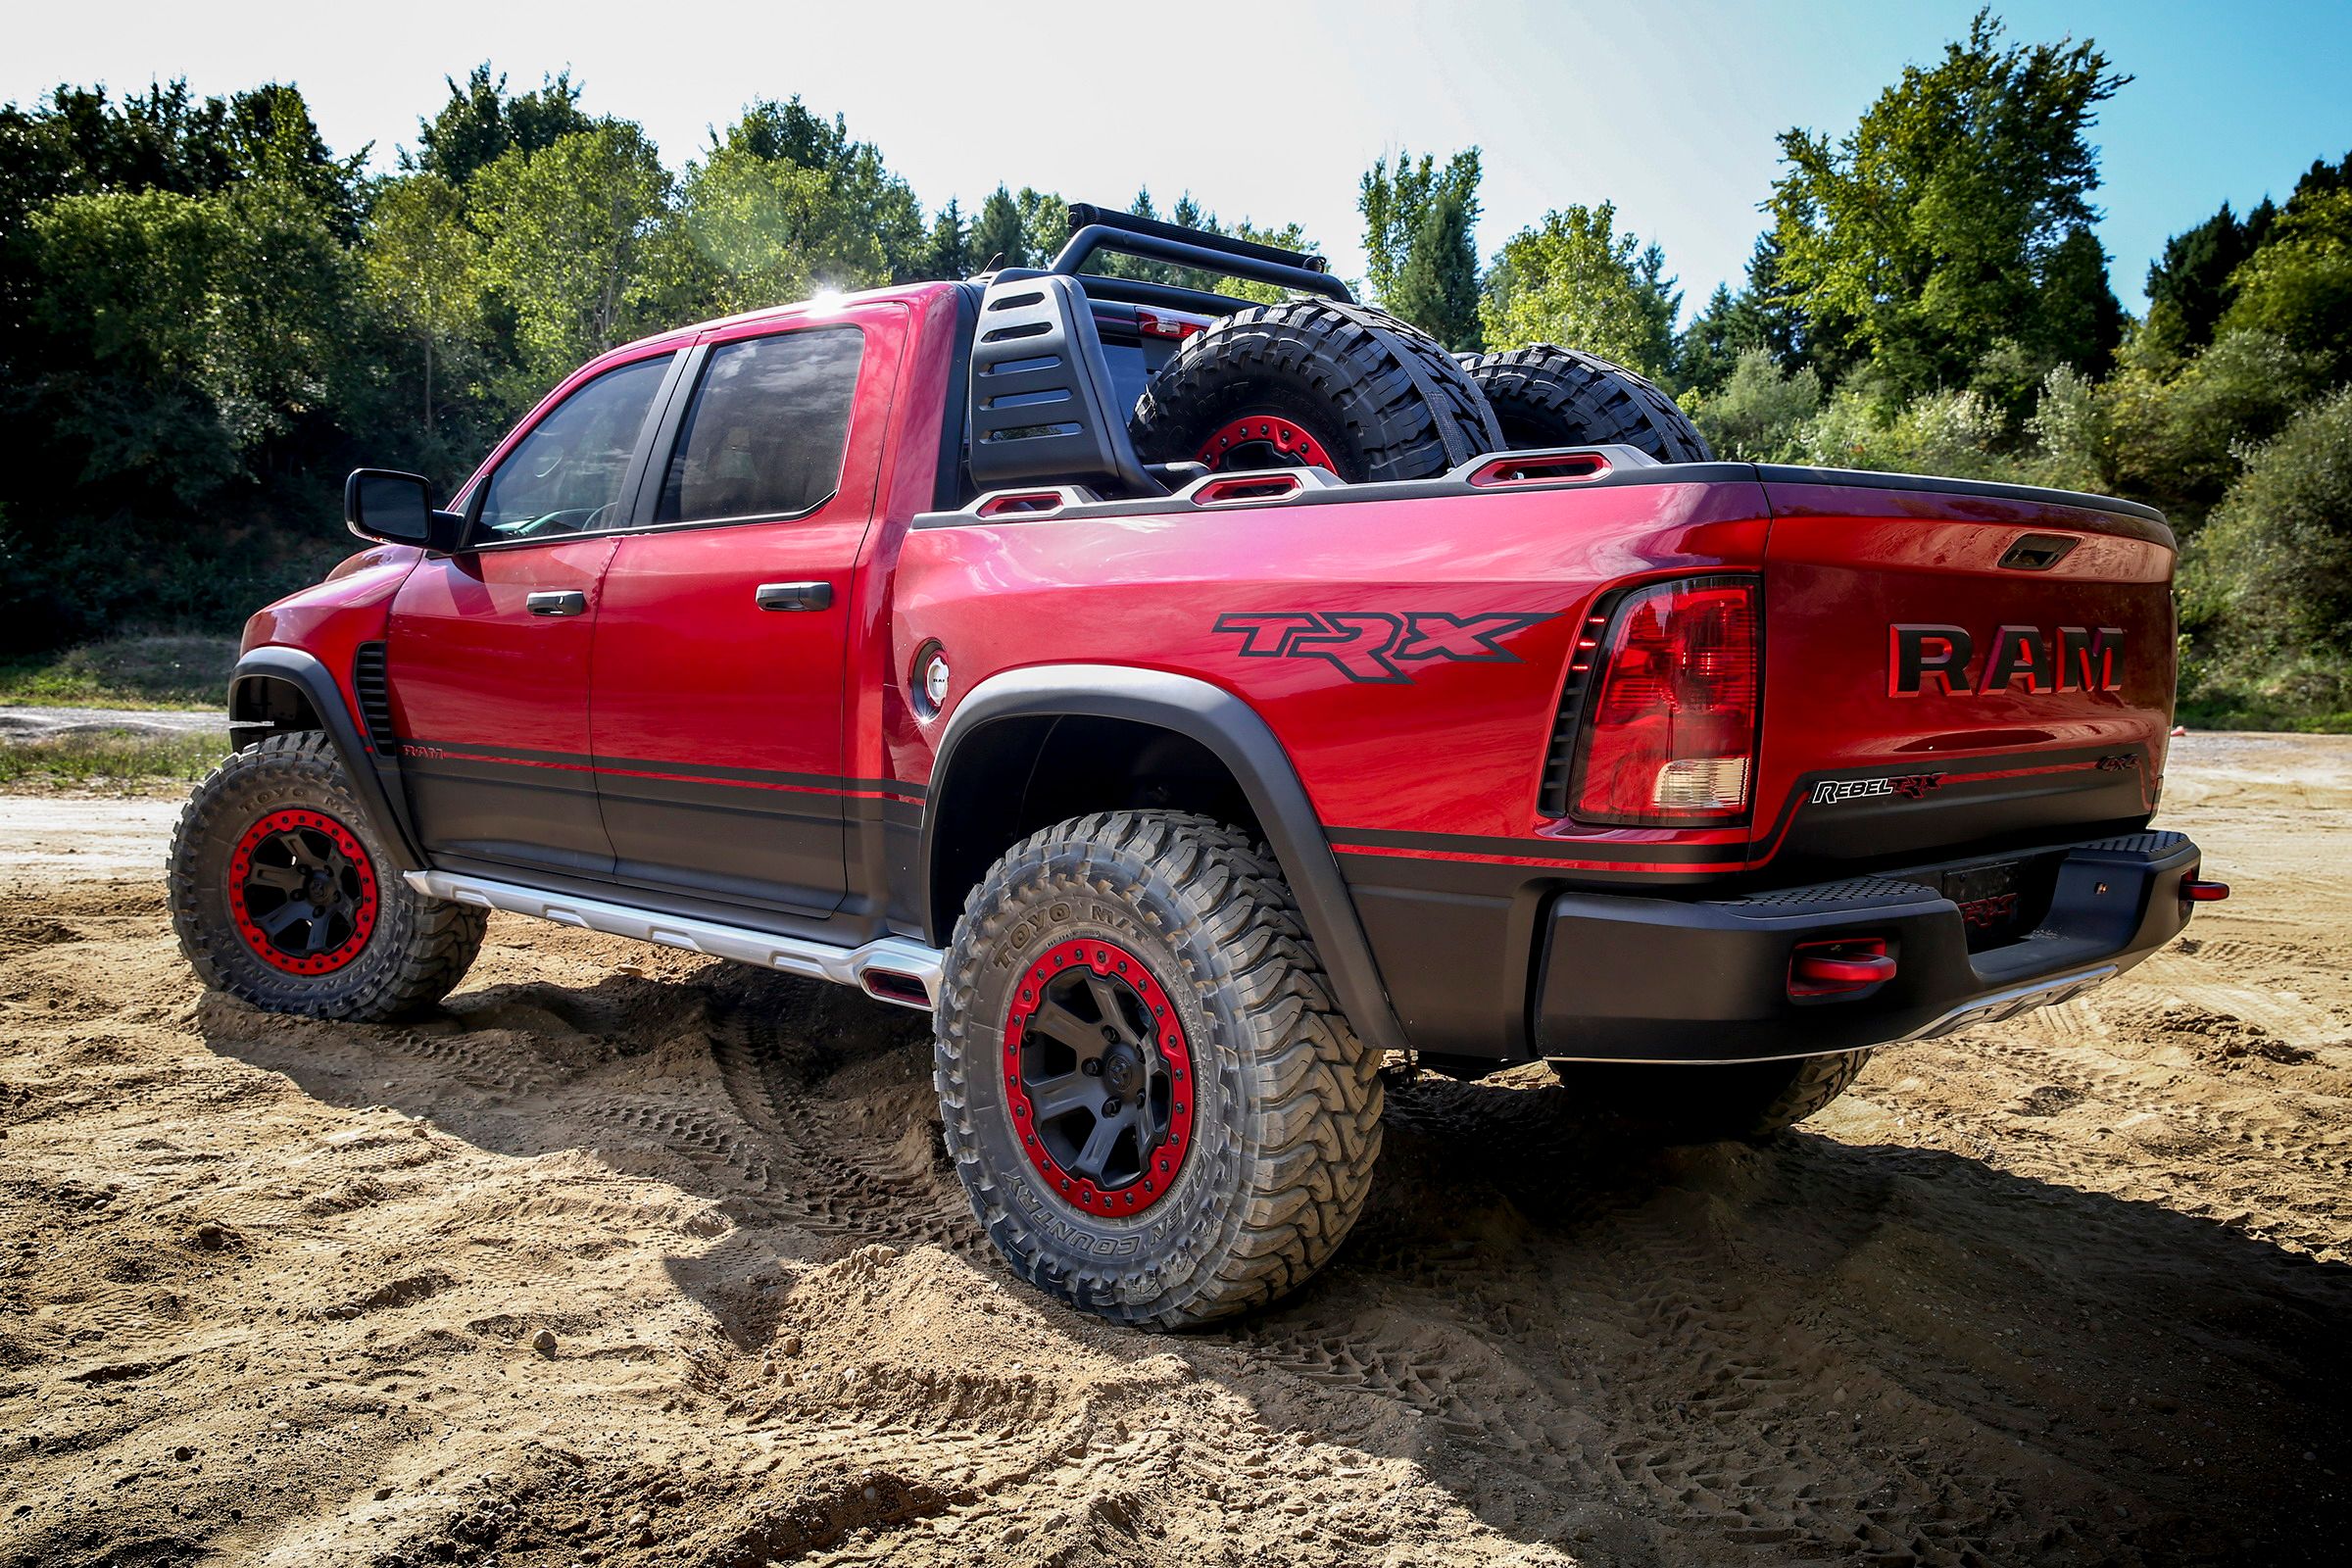 New Leaks Give Us an Incredible Look at the Ram Rebel TRX's Interior and Engine Bay